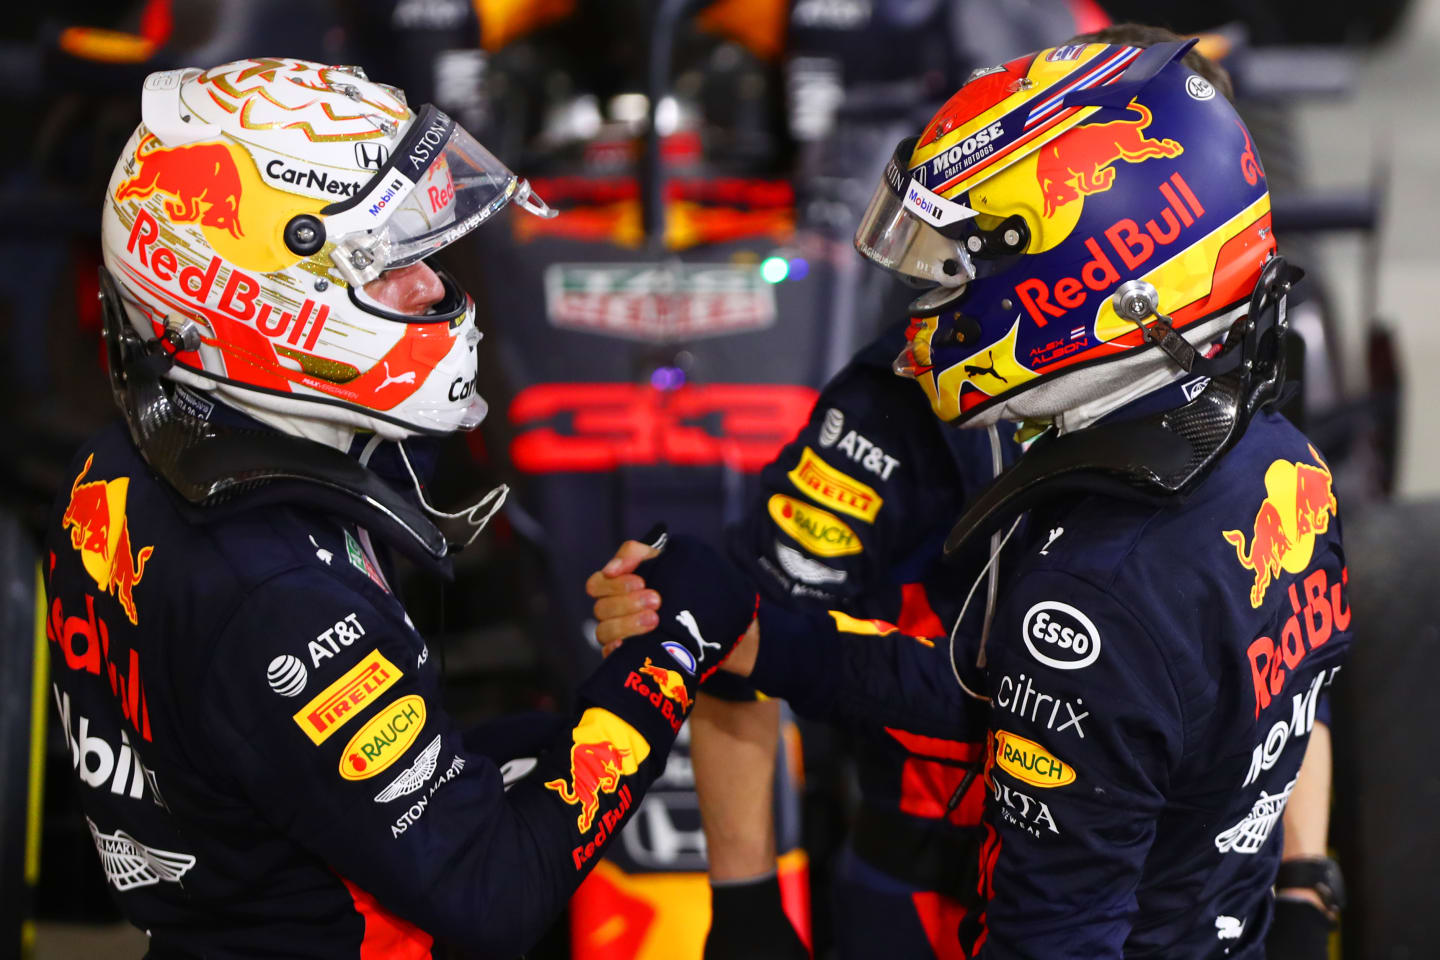 BAHRAIN, BAHRAIN - NOVEMBER 29: Second placed Max Verstappen of Netherlands and Red Bull Racing and third placed Alexander Albon of Thailand and Red Bull Racing celebrate in parc ferme during the F1 Grand Prix of Bahrain at Bahrain International Circuit on November 29, 2020 in Bahrain, Bahrain. (Photo by Dan Istitene - Formula 1/Formula 1 via Getty Images)